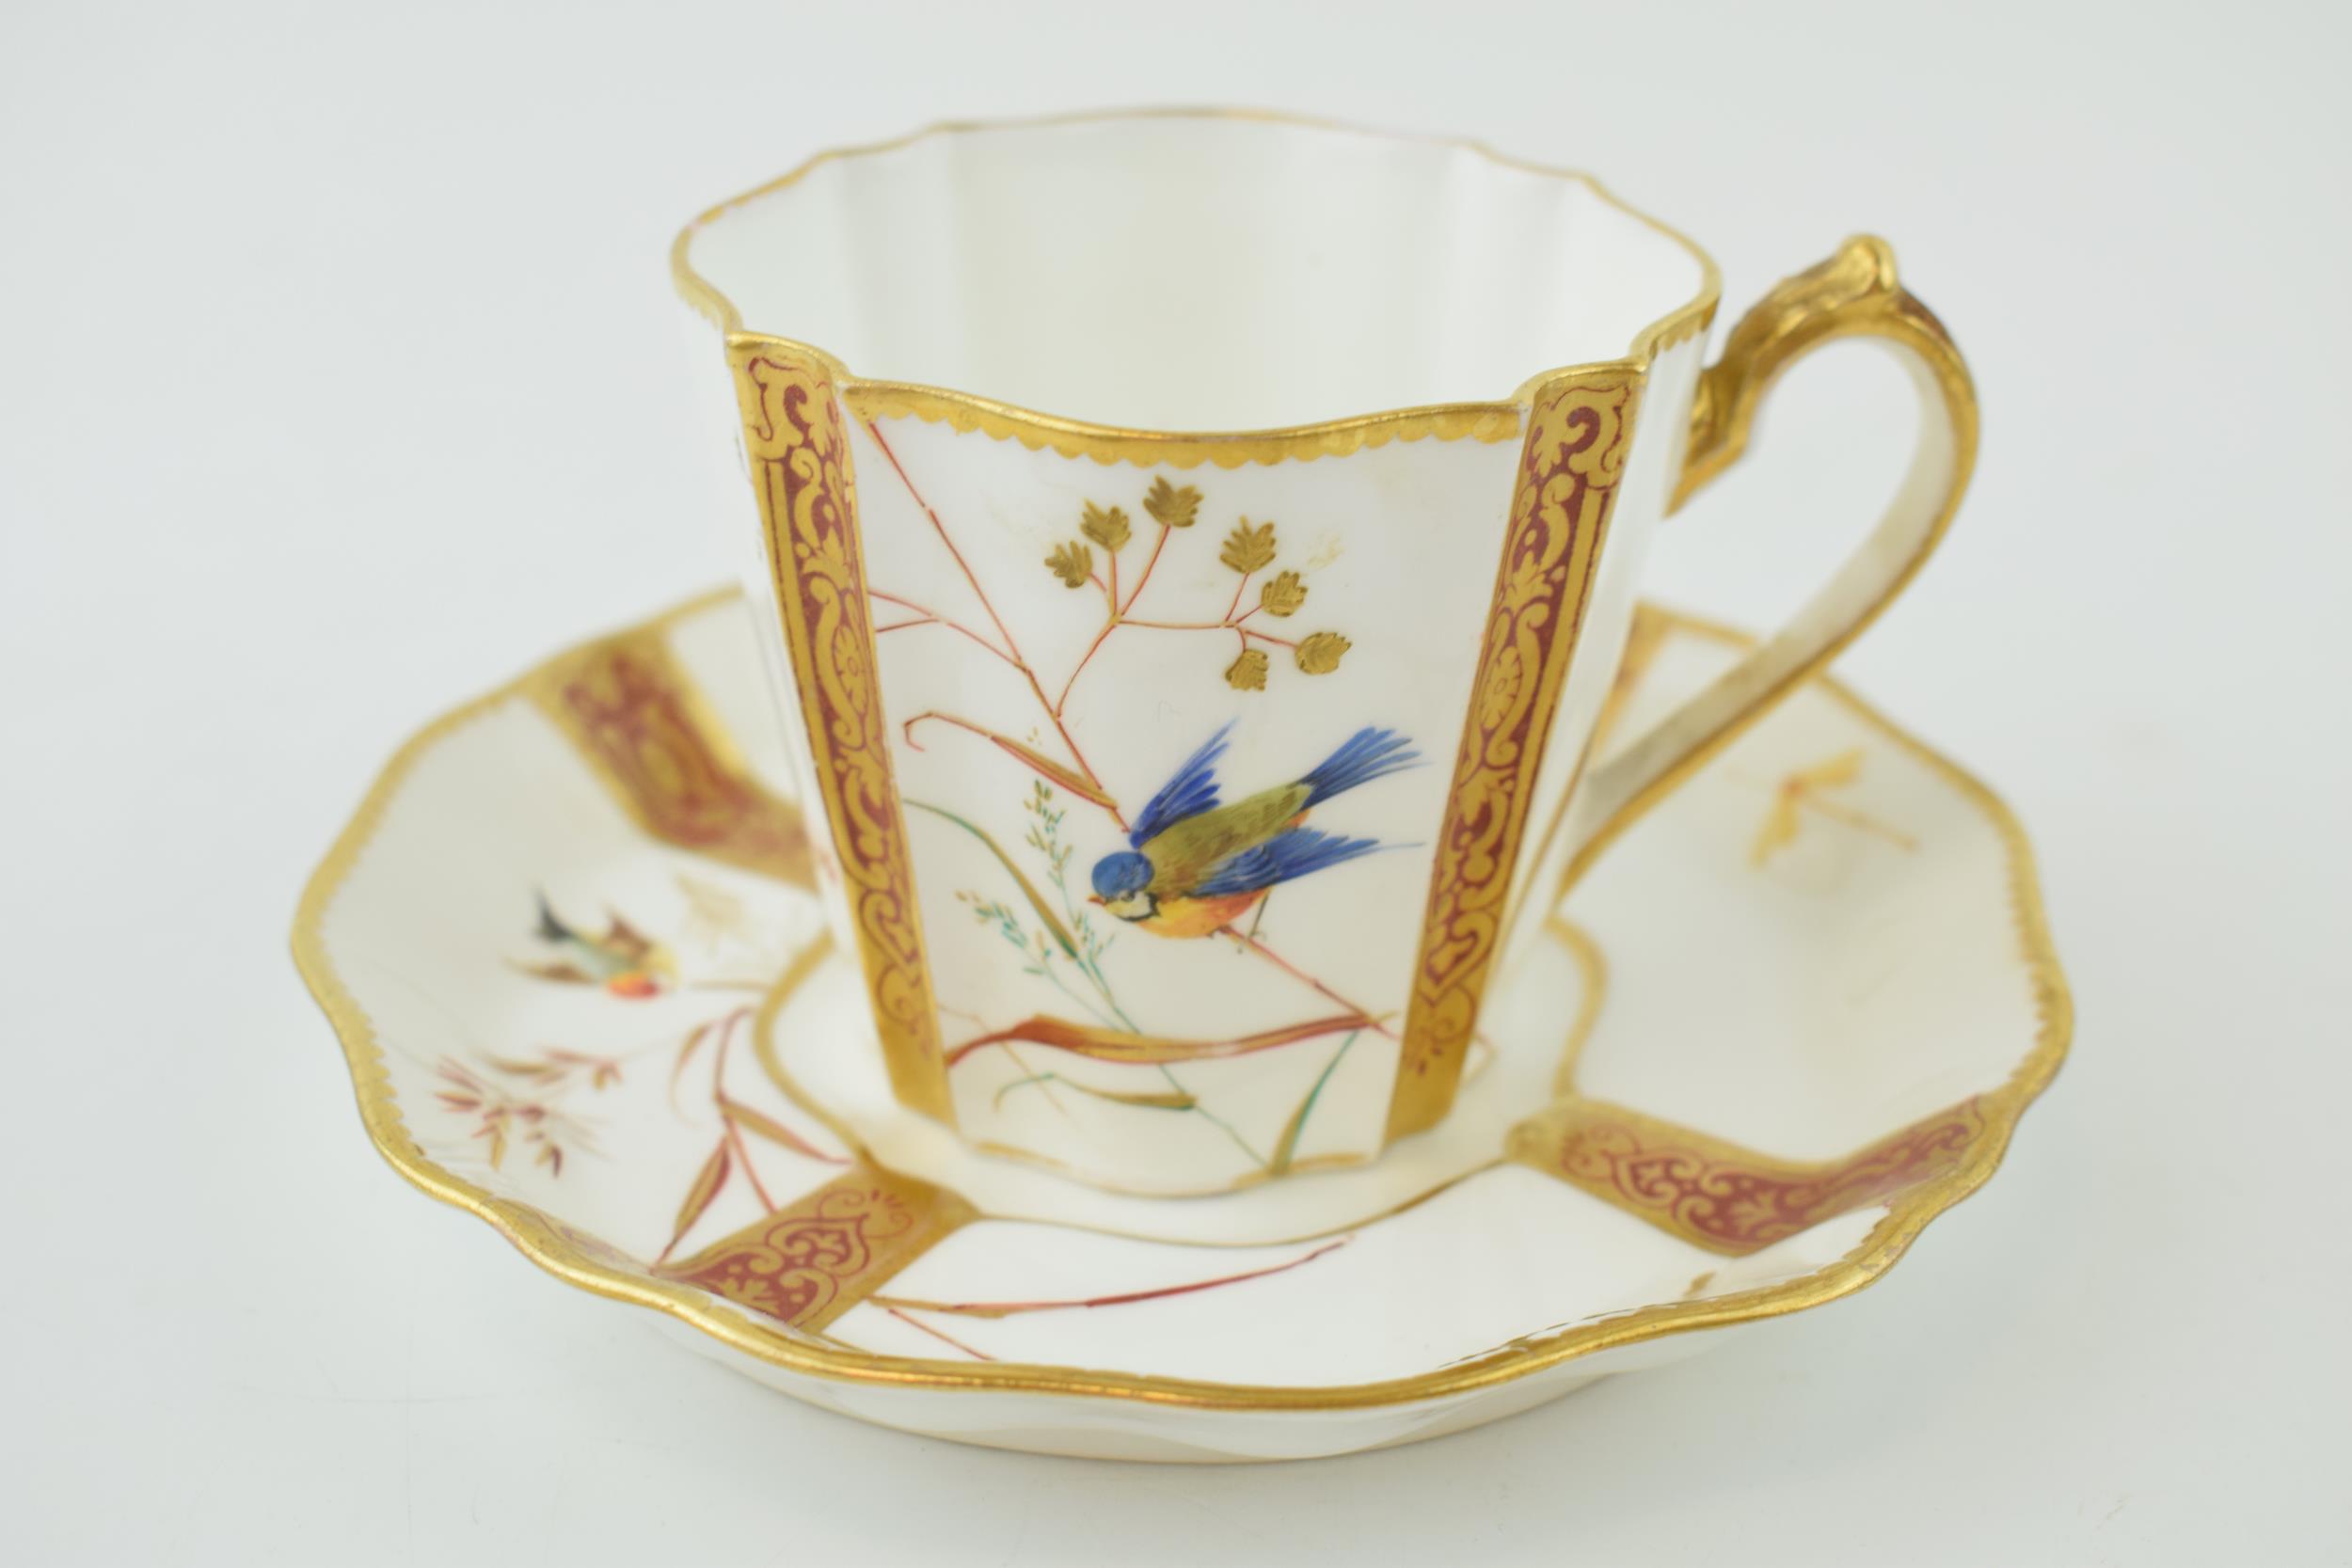 Wedgwood cup and saucer, aesthetic design, with bluetit amongst foliage (2). In good condition